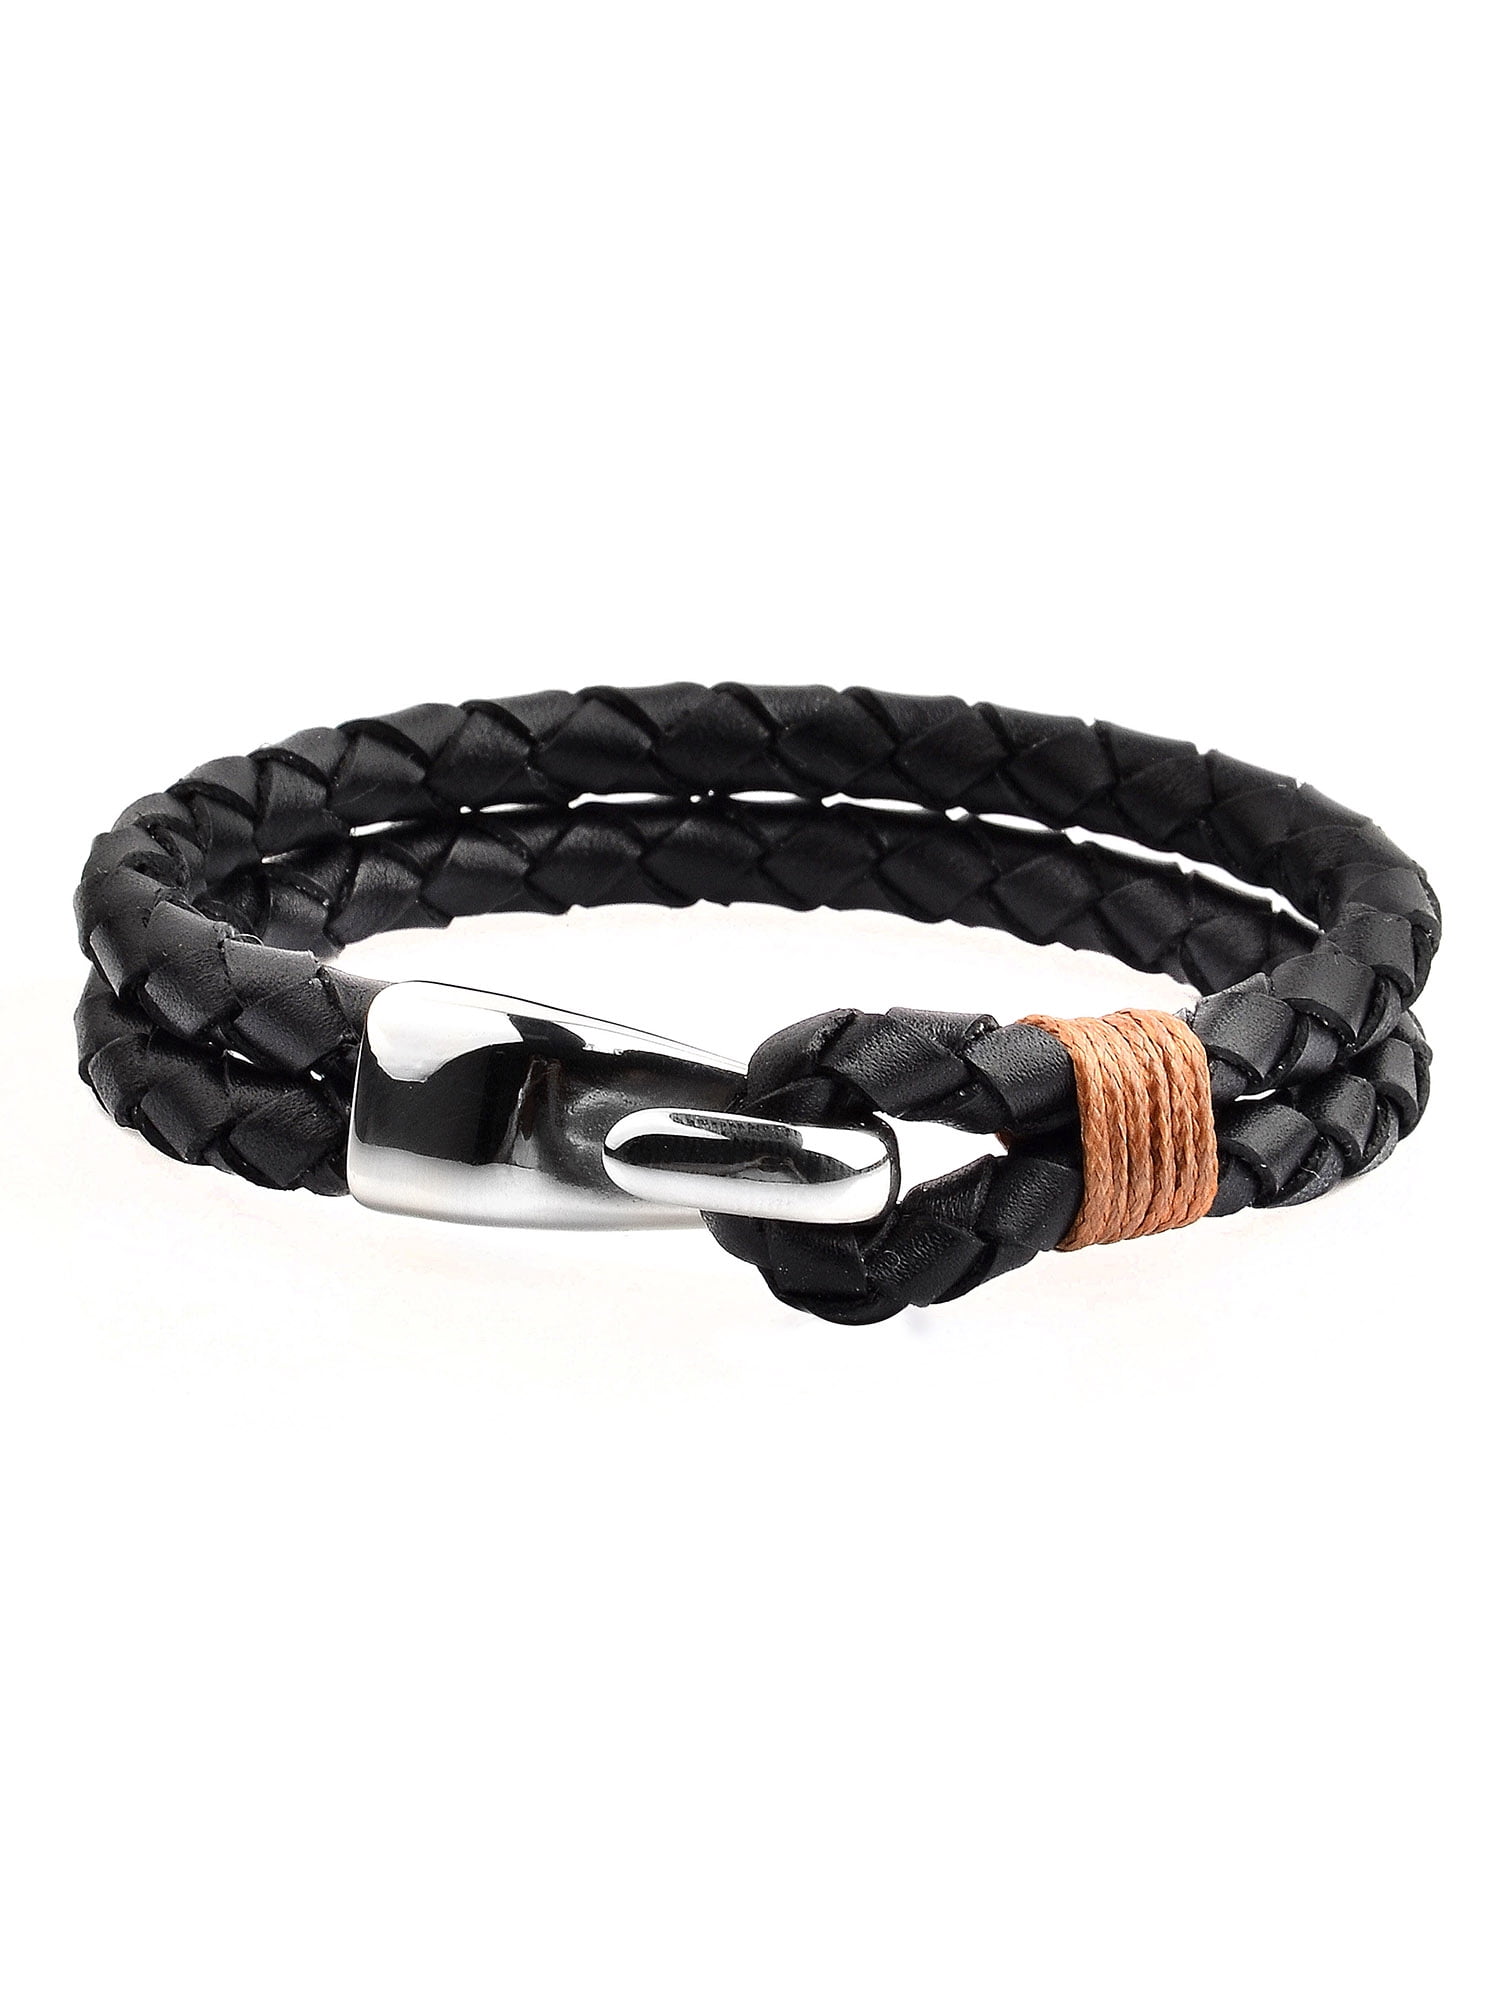 Coloured Braided Leather Triple Wrap Bracelet Wristband Stainless Steel Clasp 